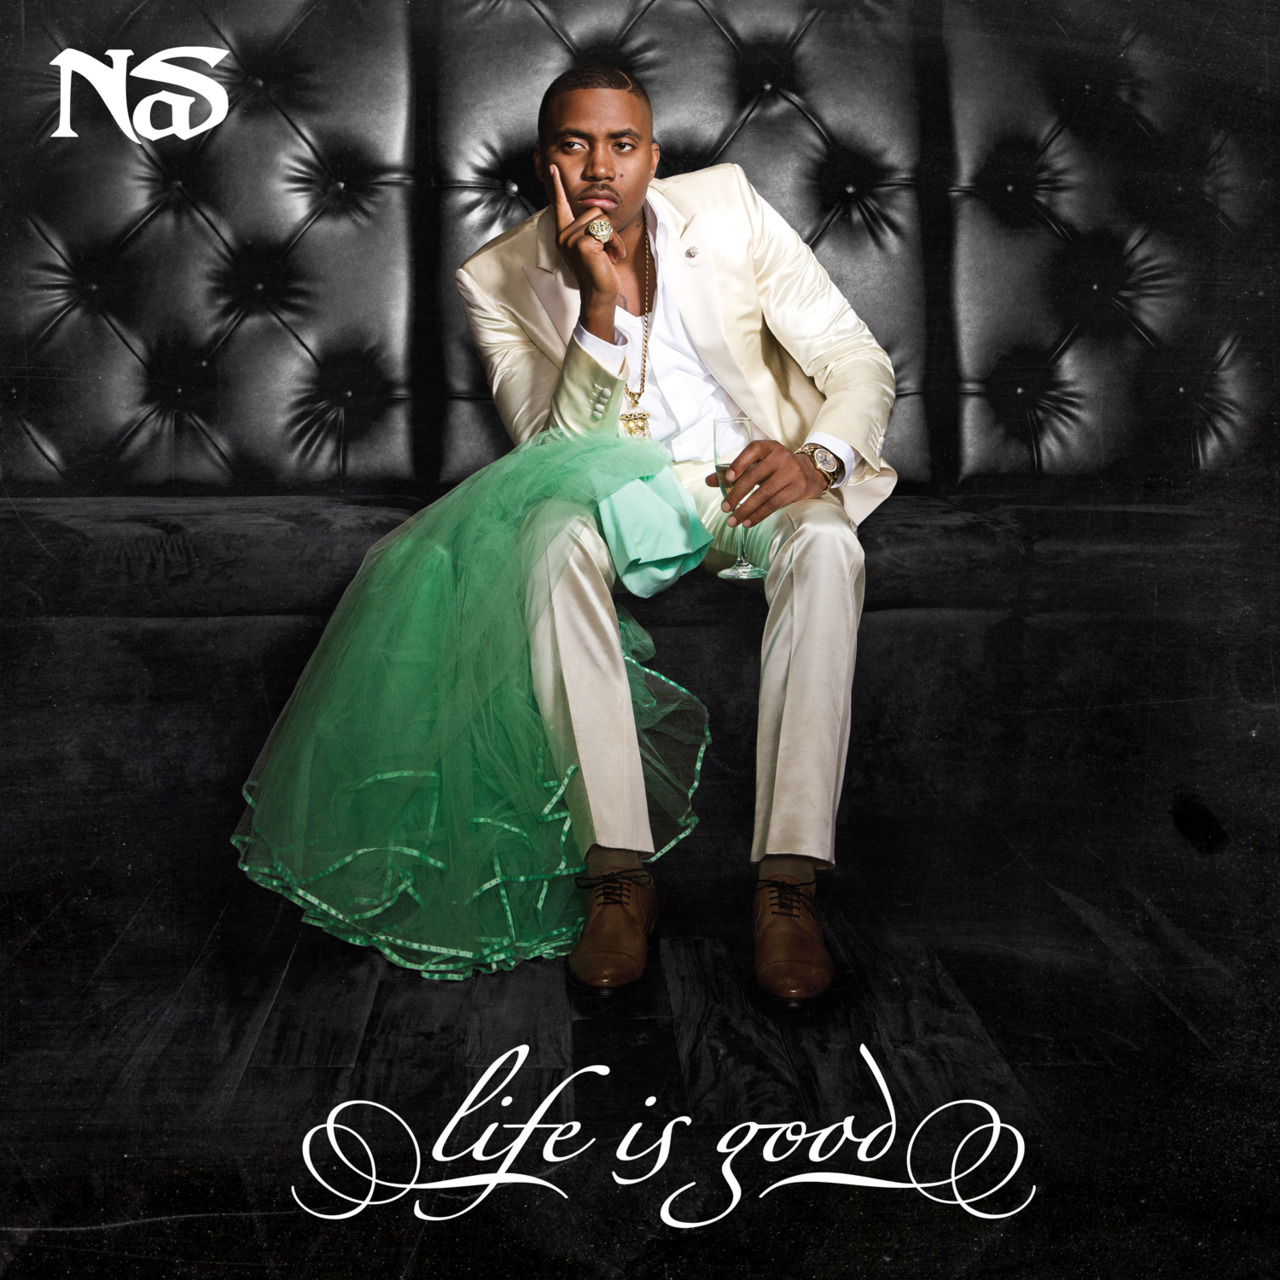 nas-life-is-good